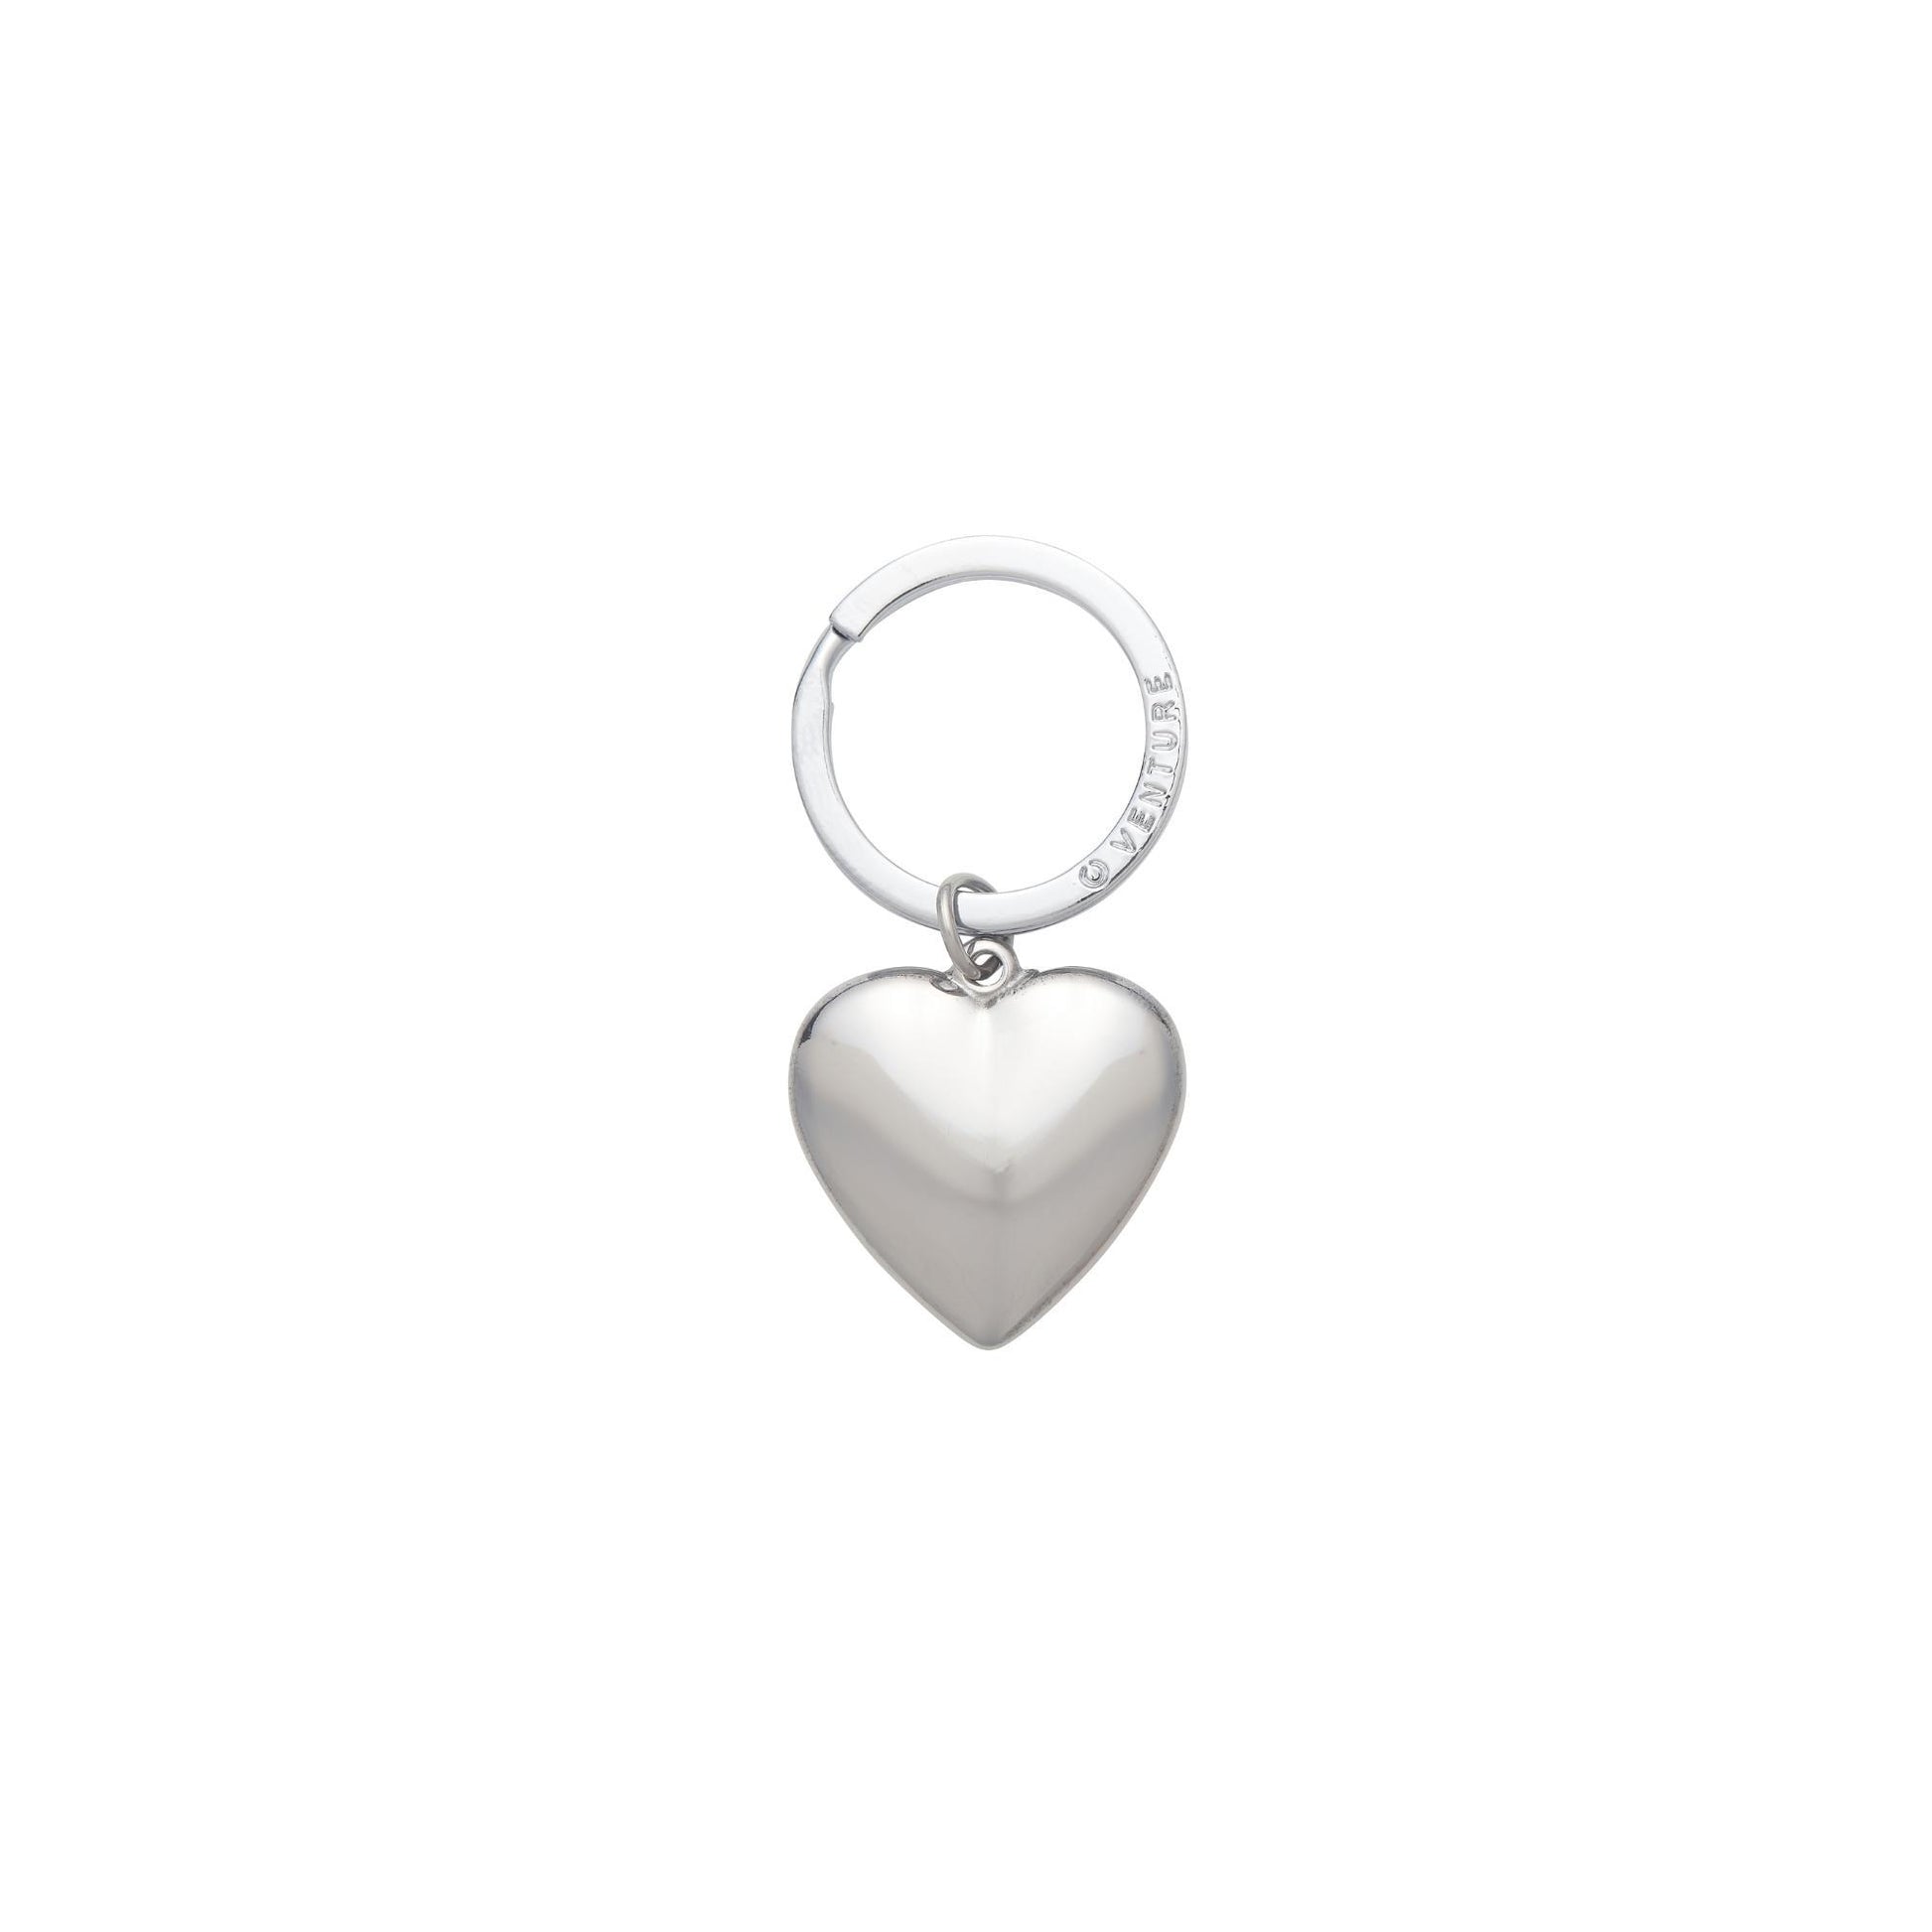 Quicksilver puffy heart charm with split ring.  This is a silver puffy heart that can be added to your big o key ring or stand on its own.